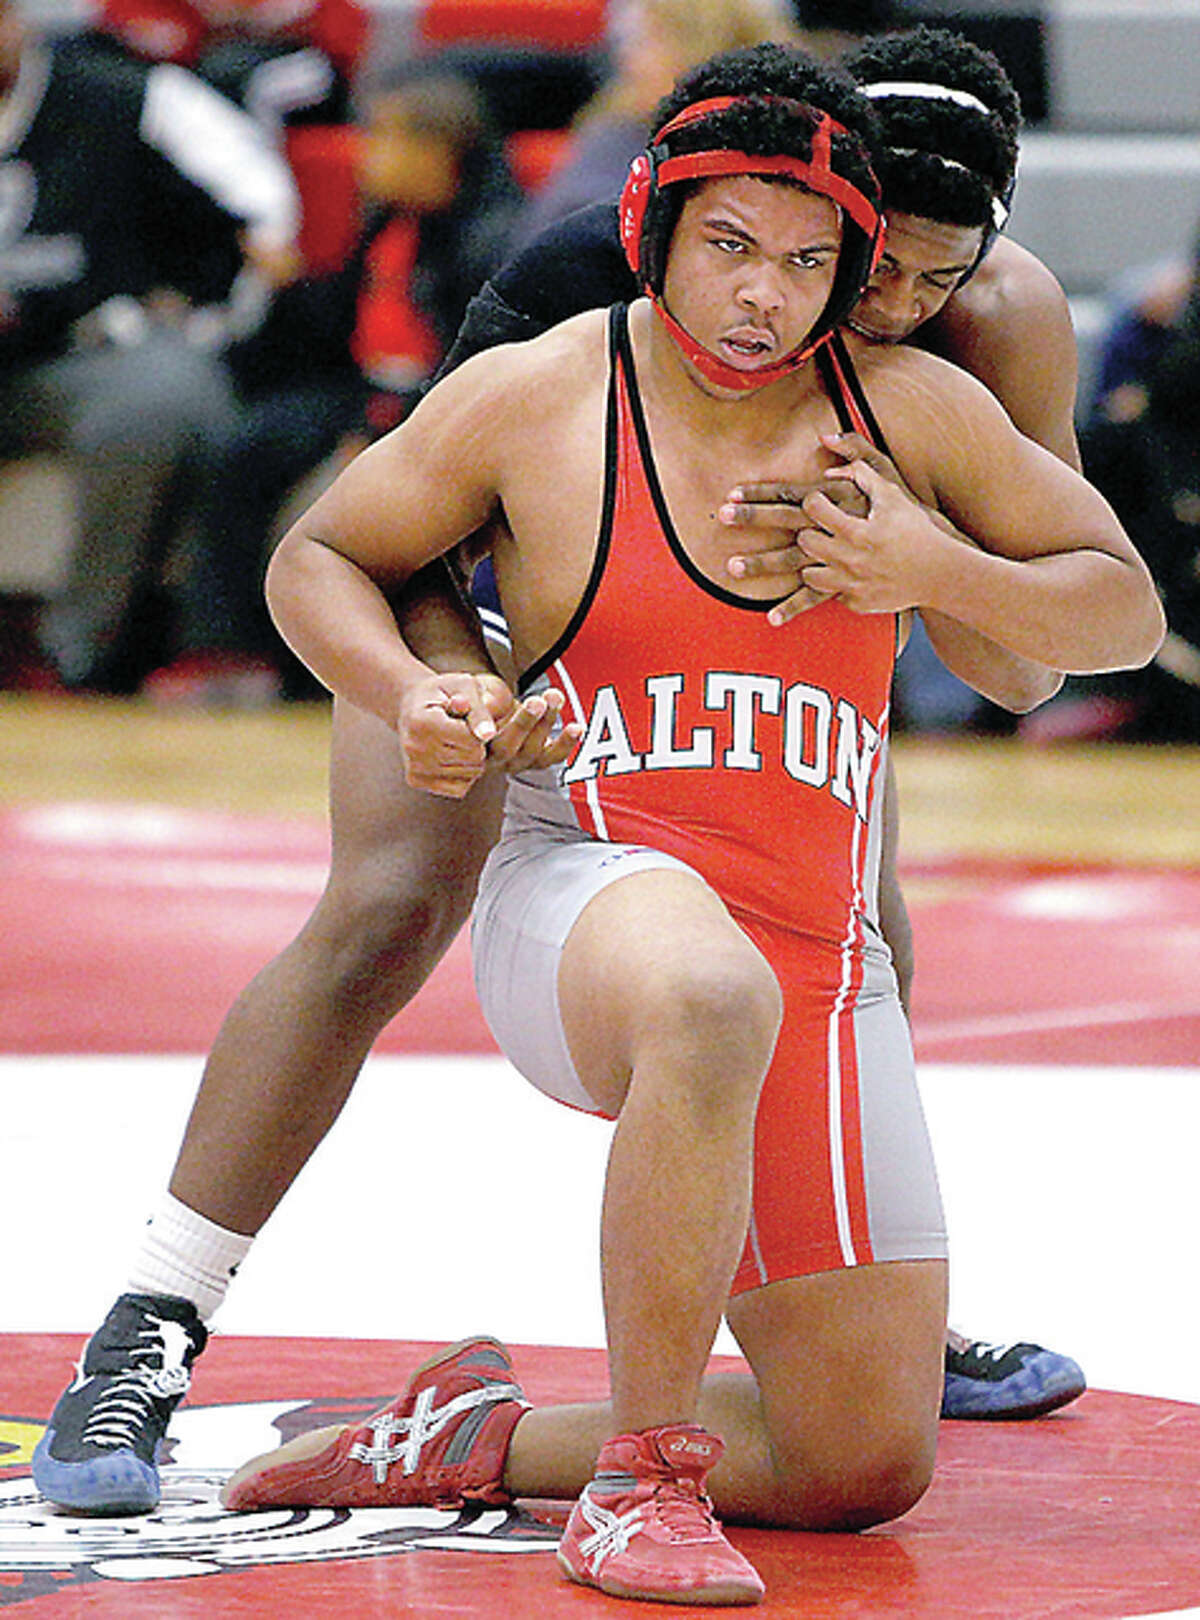 Alequan Russell of Alton, front, struggles to get free of East’s Duane Hill in the 220-pound bout Wednesday at AHS. Hill defeated Russell 3-1.